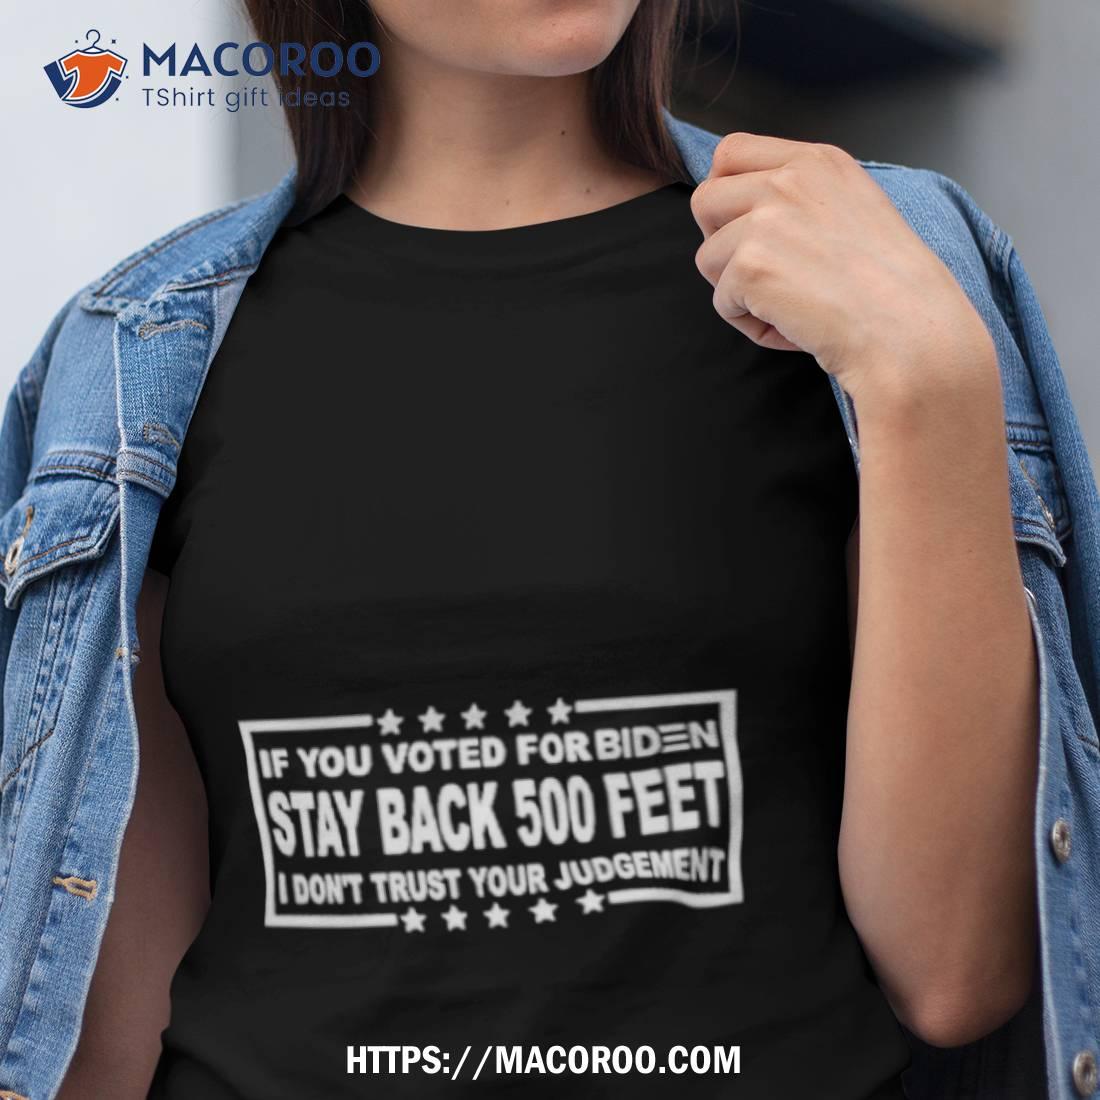 https://images.macoroo.com/wp-content/uploads/2023/10/if-you-voted-for-biden-stay-back-500-feet-shirt-tshirt.jpg